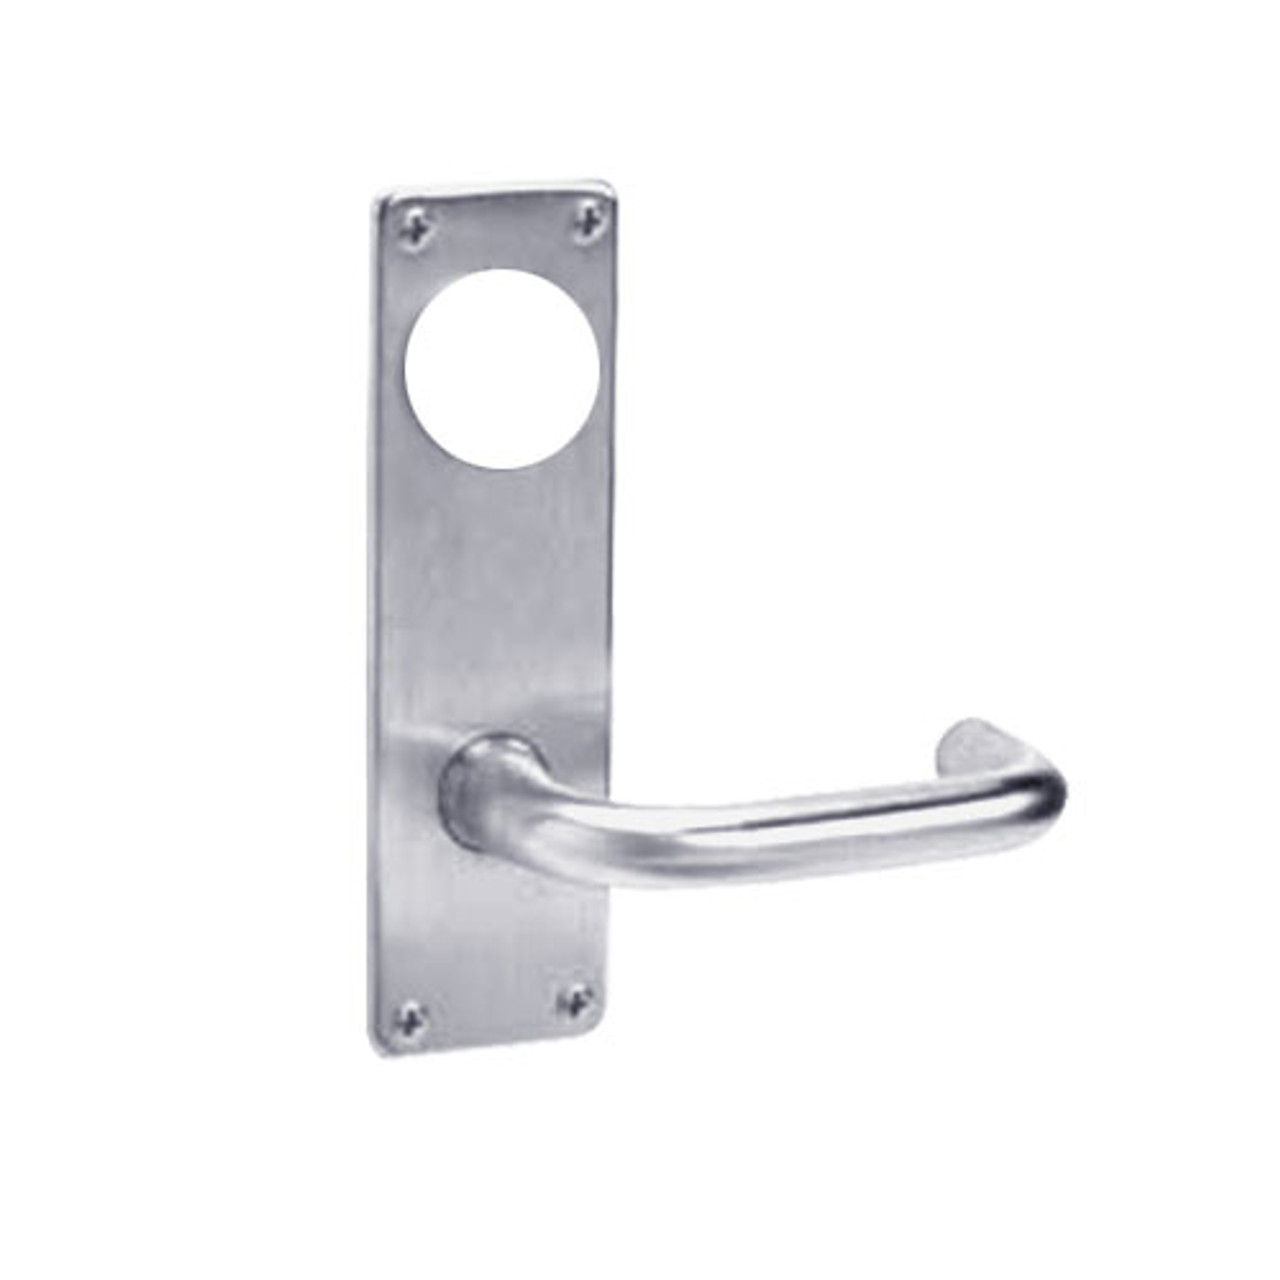 ML2032-LSN-626-CL6 Corbin Russwin ML2000 Series IC 6-Pin Less Core Mortise Institution Locksets with Lustra Lever in Satin Chrome